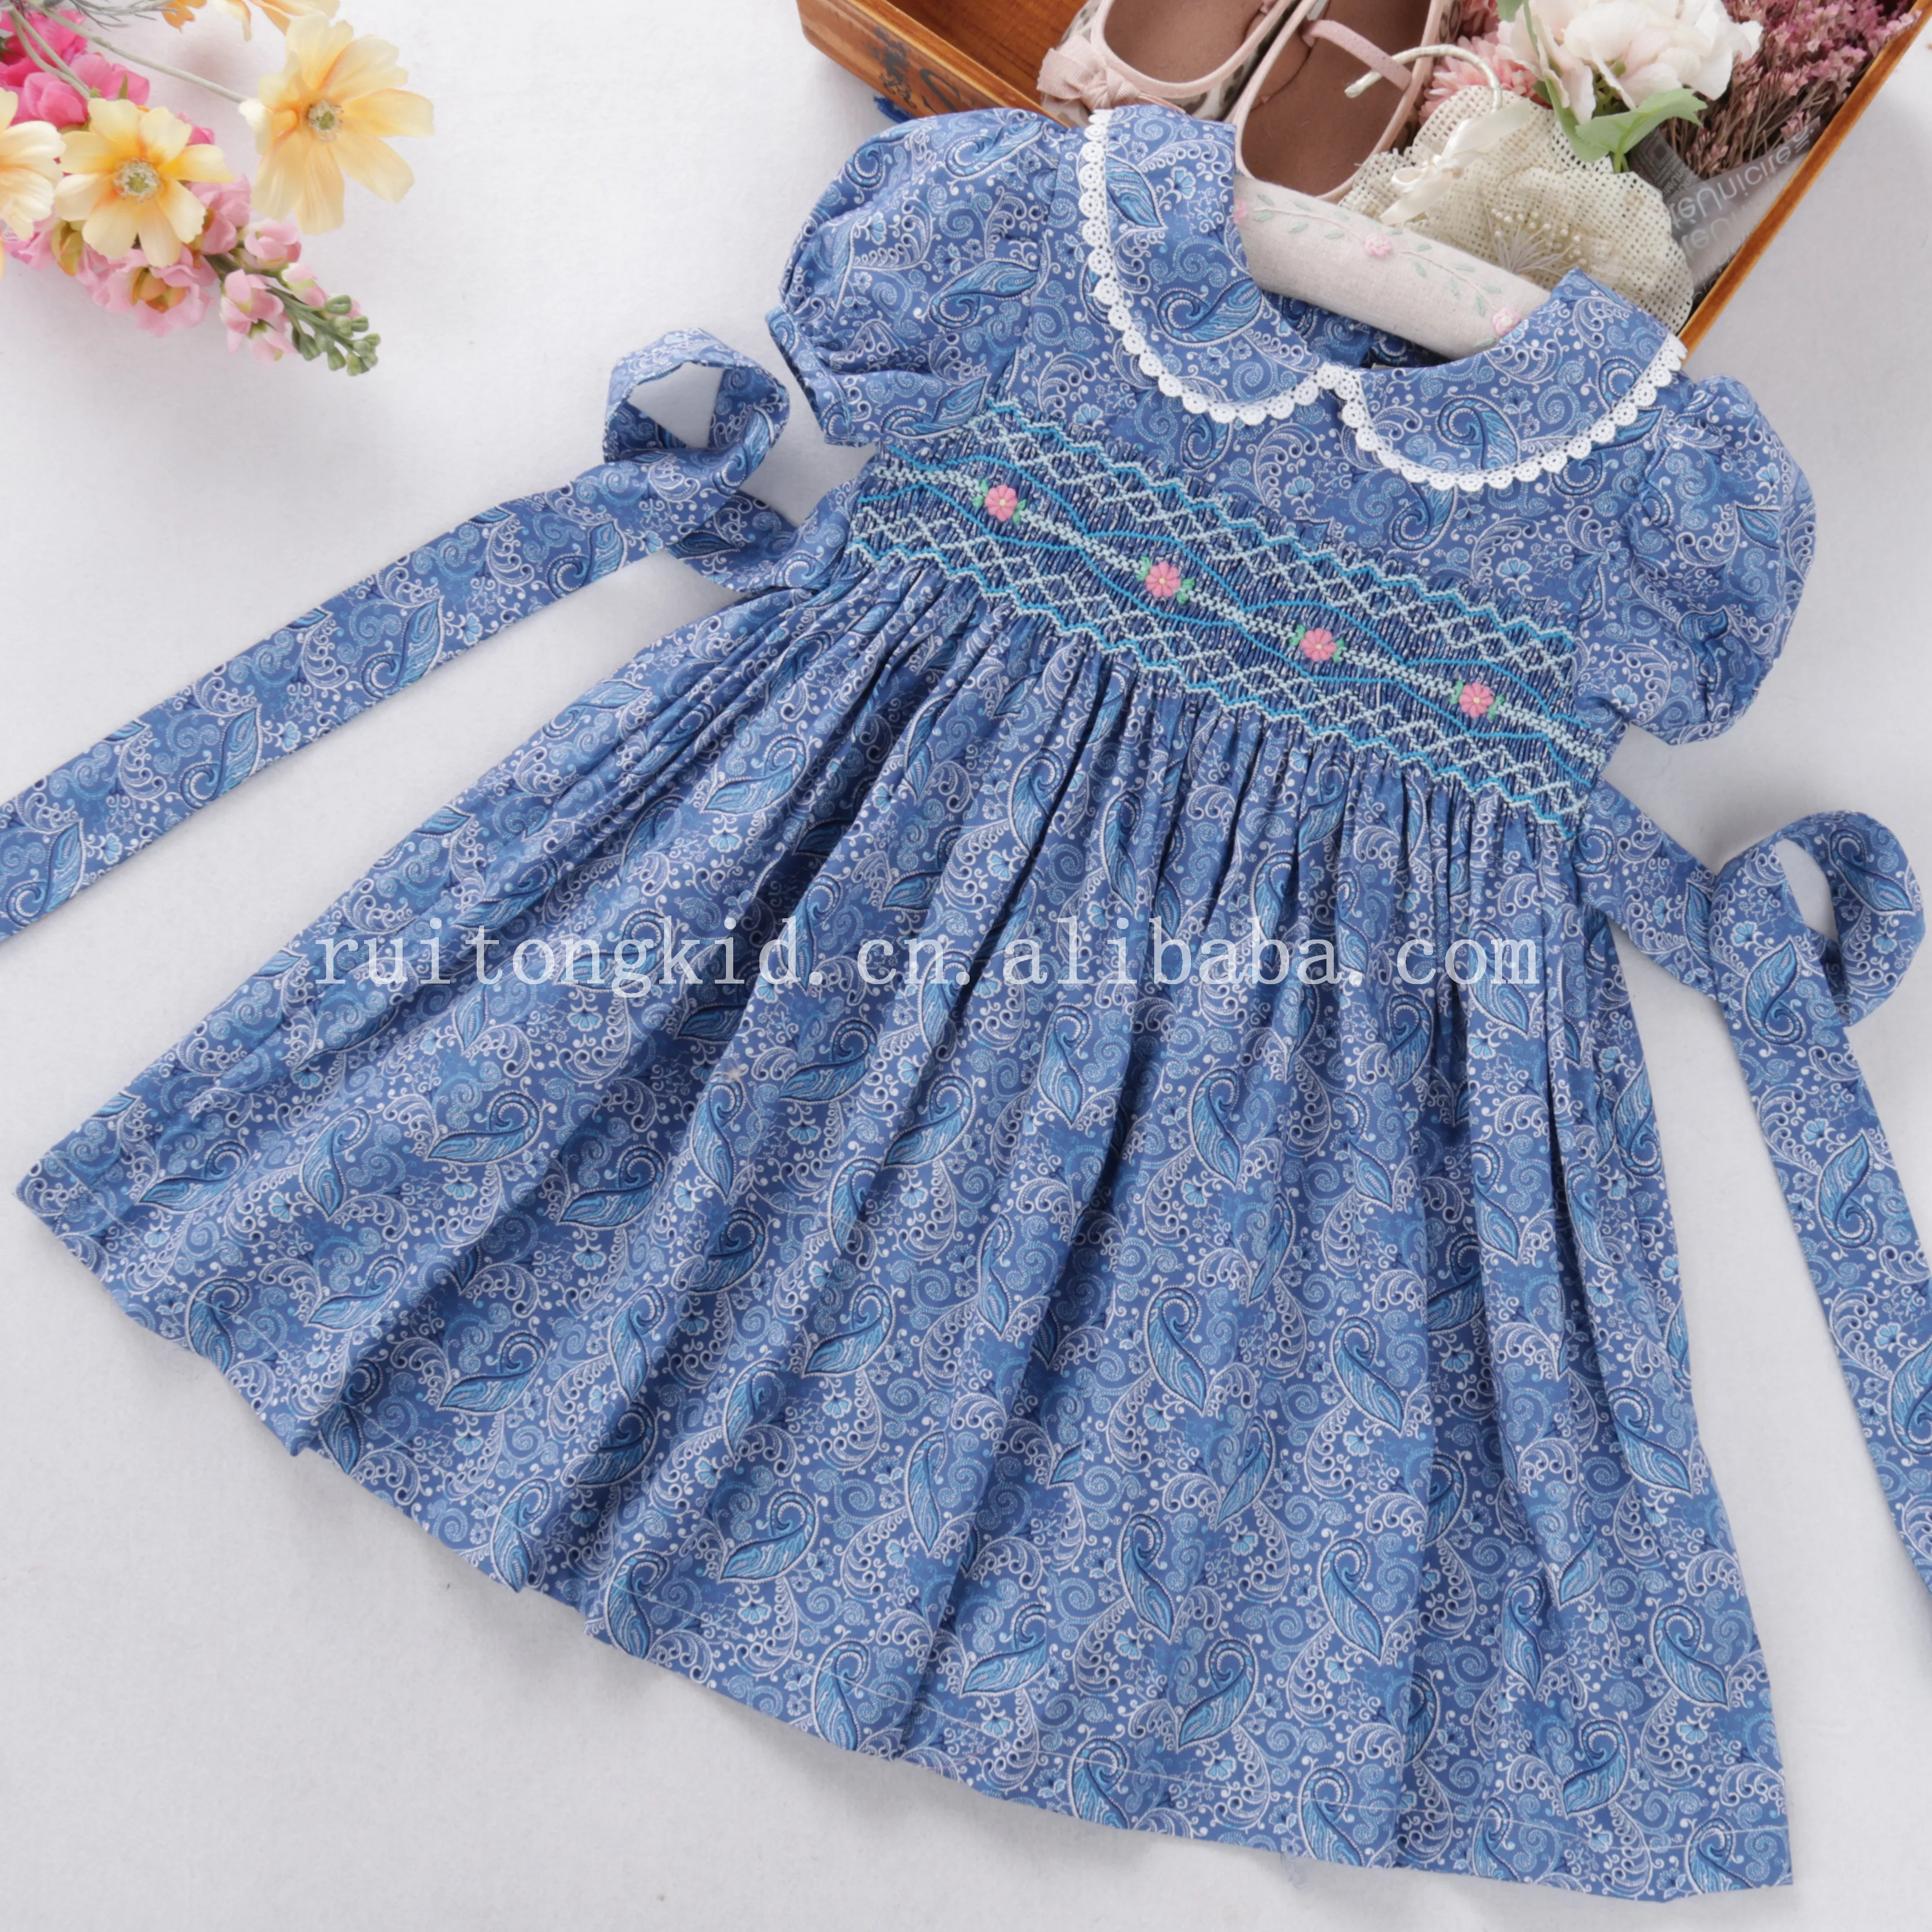 

C262673 summer flower floral baby girls' smocked dresses Blue peter pan collar wholesale children clothes boutiques